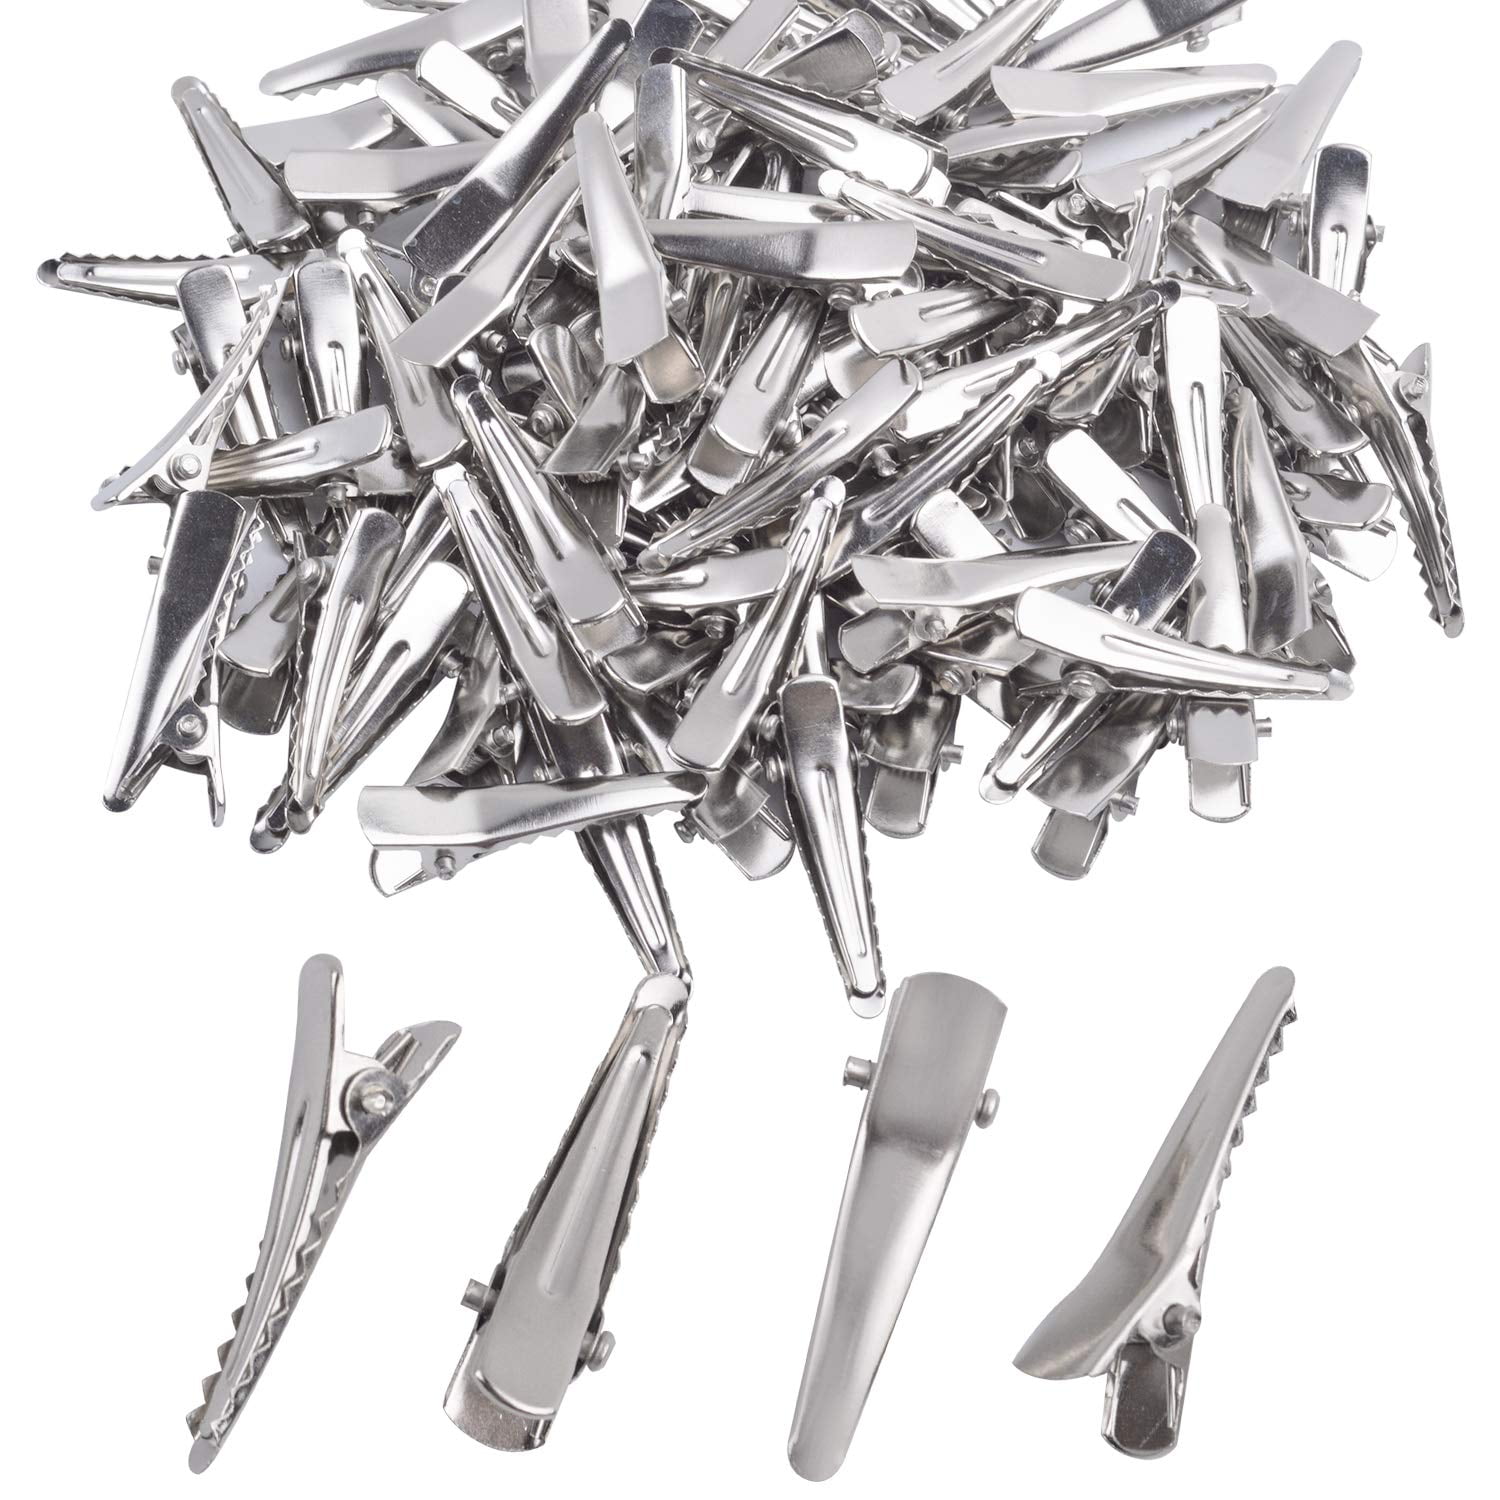 30MM Small Alligator Hair Clips, 100 Pieces Silver Metal Alligator